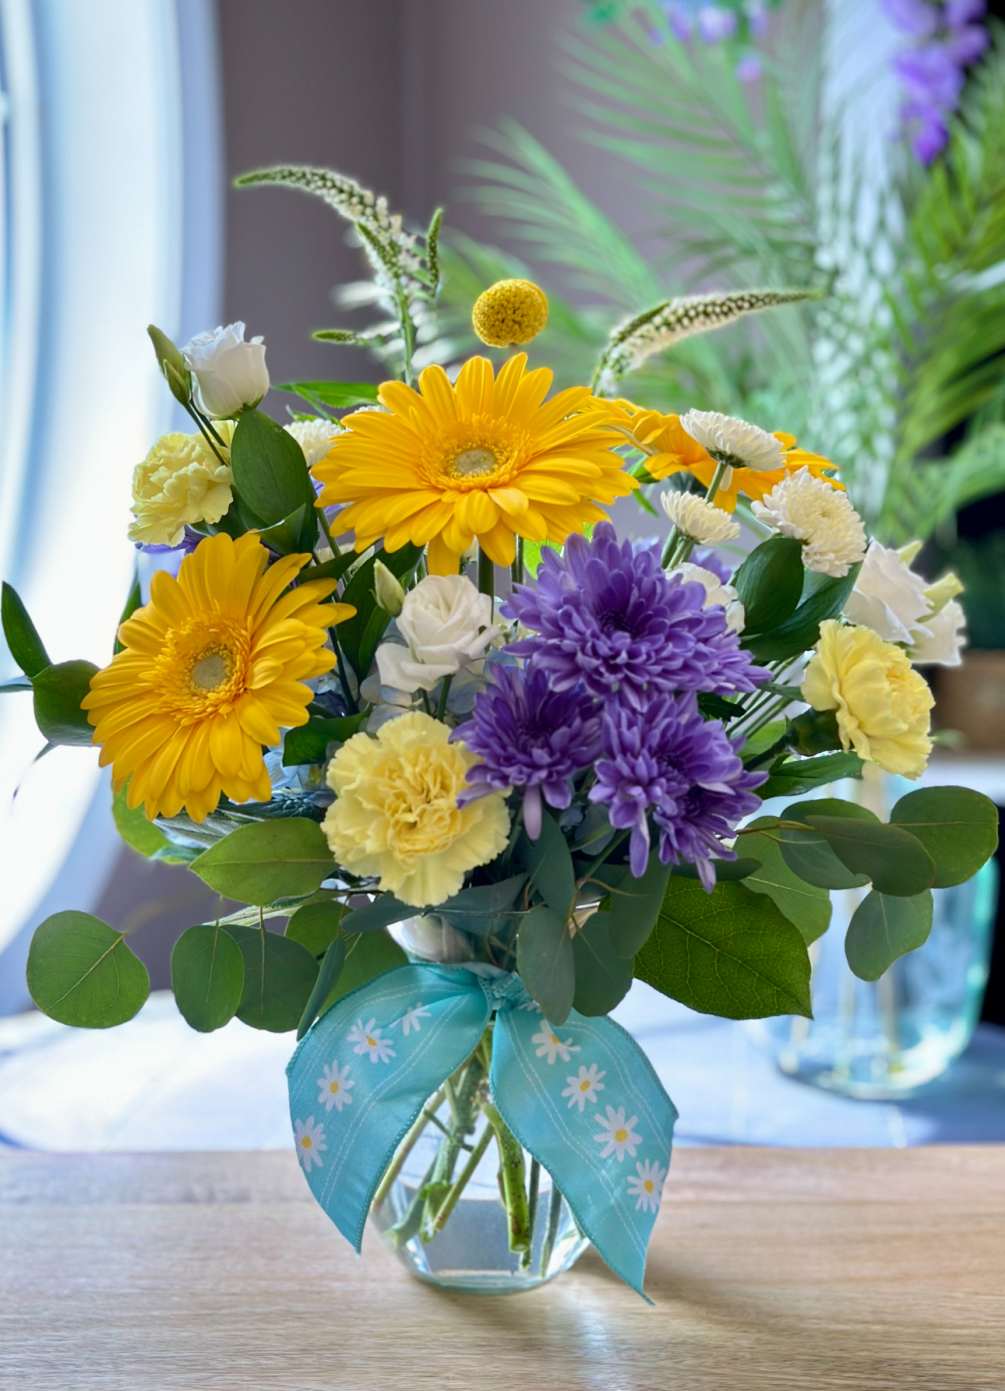 A bright uplifting mix of bright yellow &amp; blue fresh flowers that